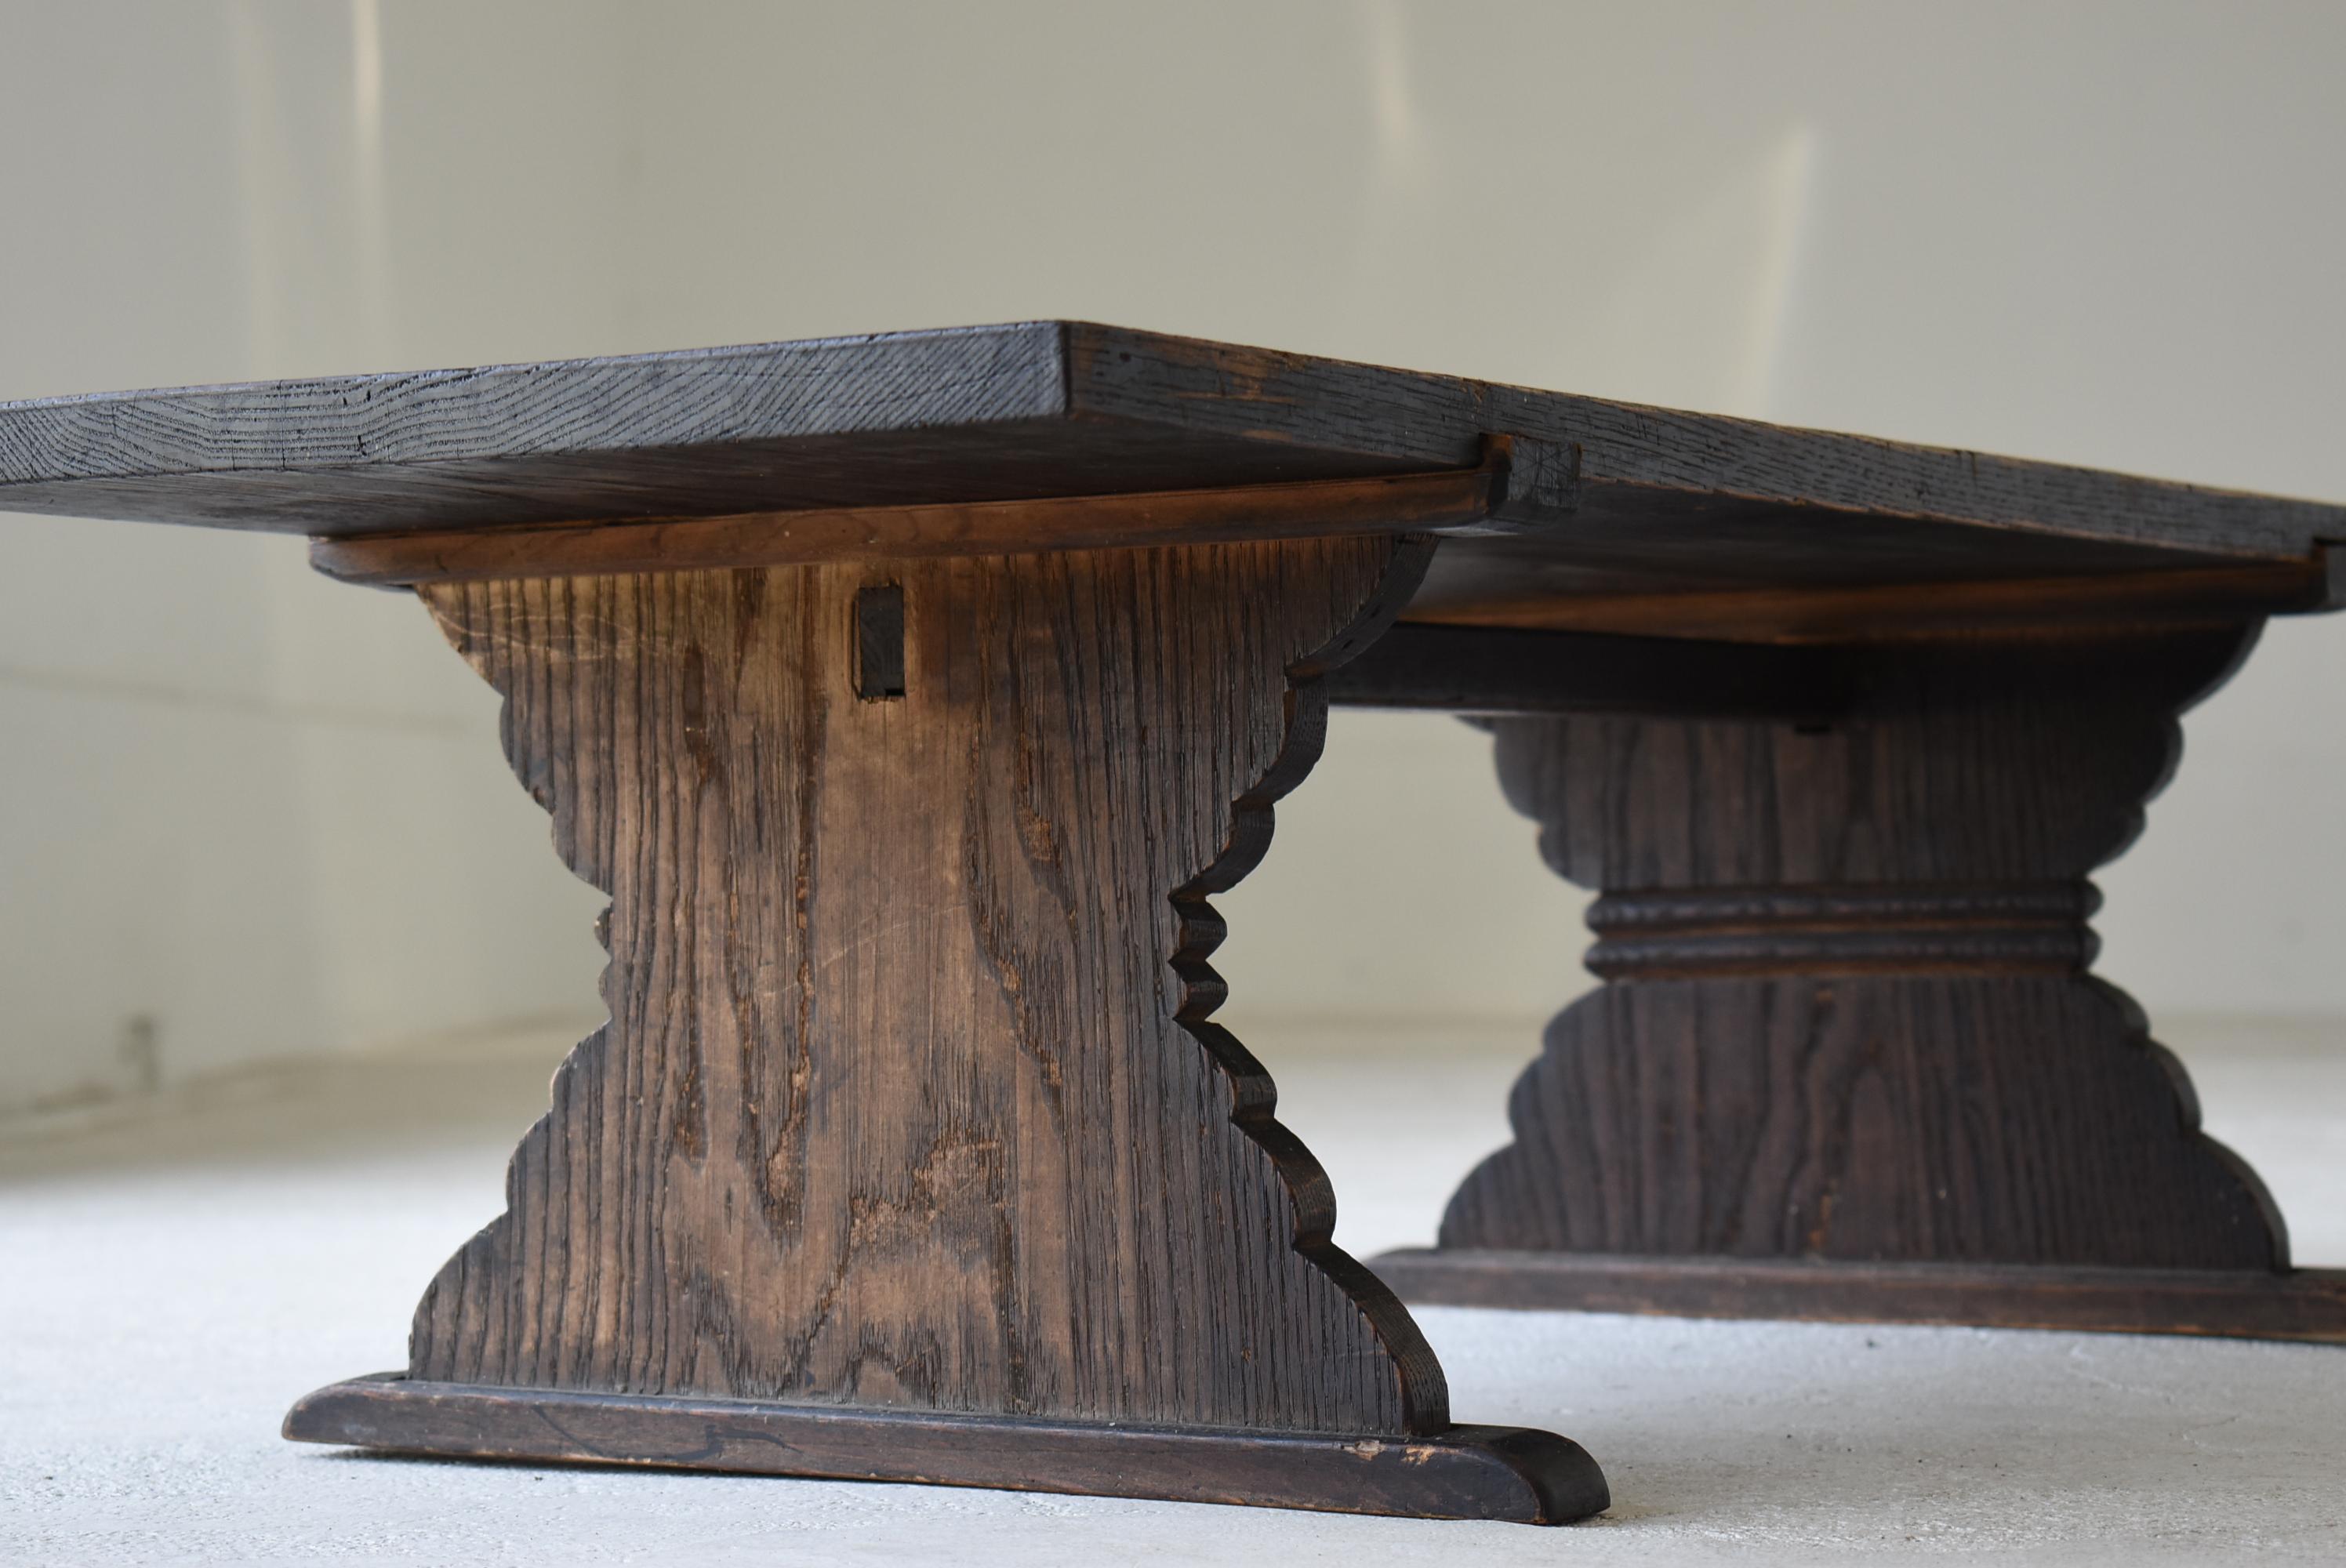 This desk was made in Japan from the latter half of the Edo period to the Meiji period.
In old Japan, people used to sit on the floor to eat and study.
It is mainly a desk for study and office work.
In the Edo period, there was a facility to